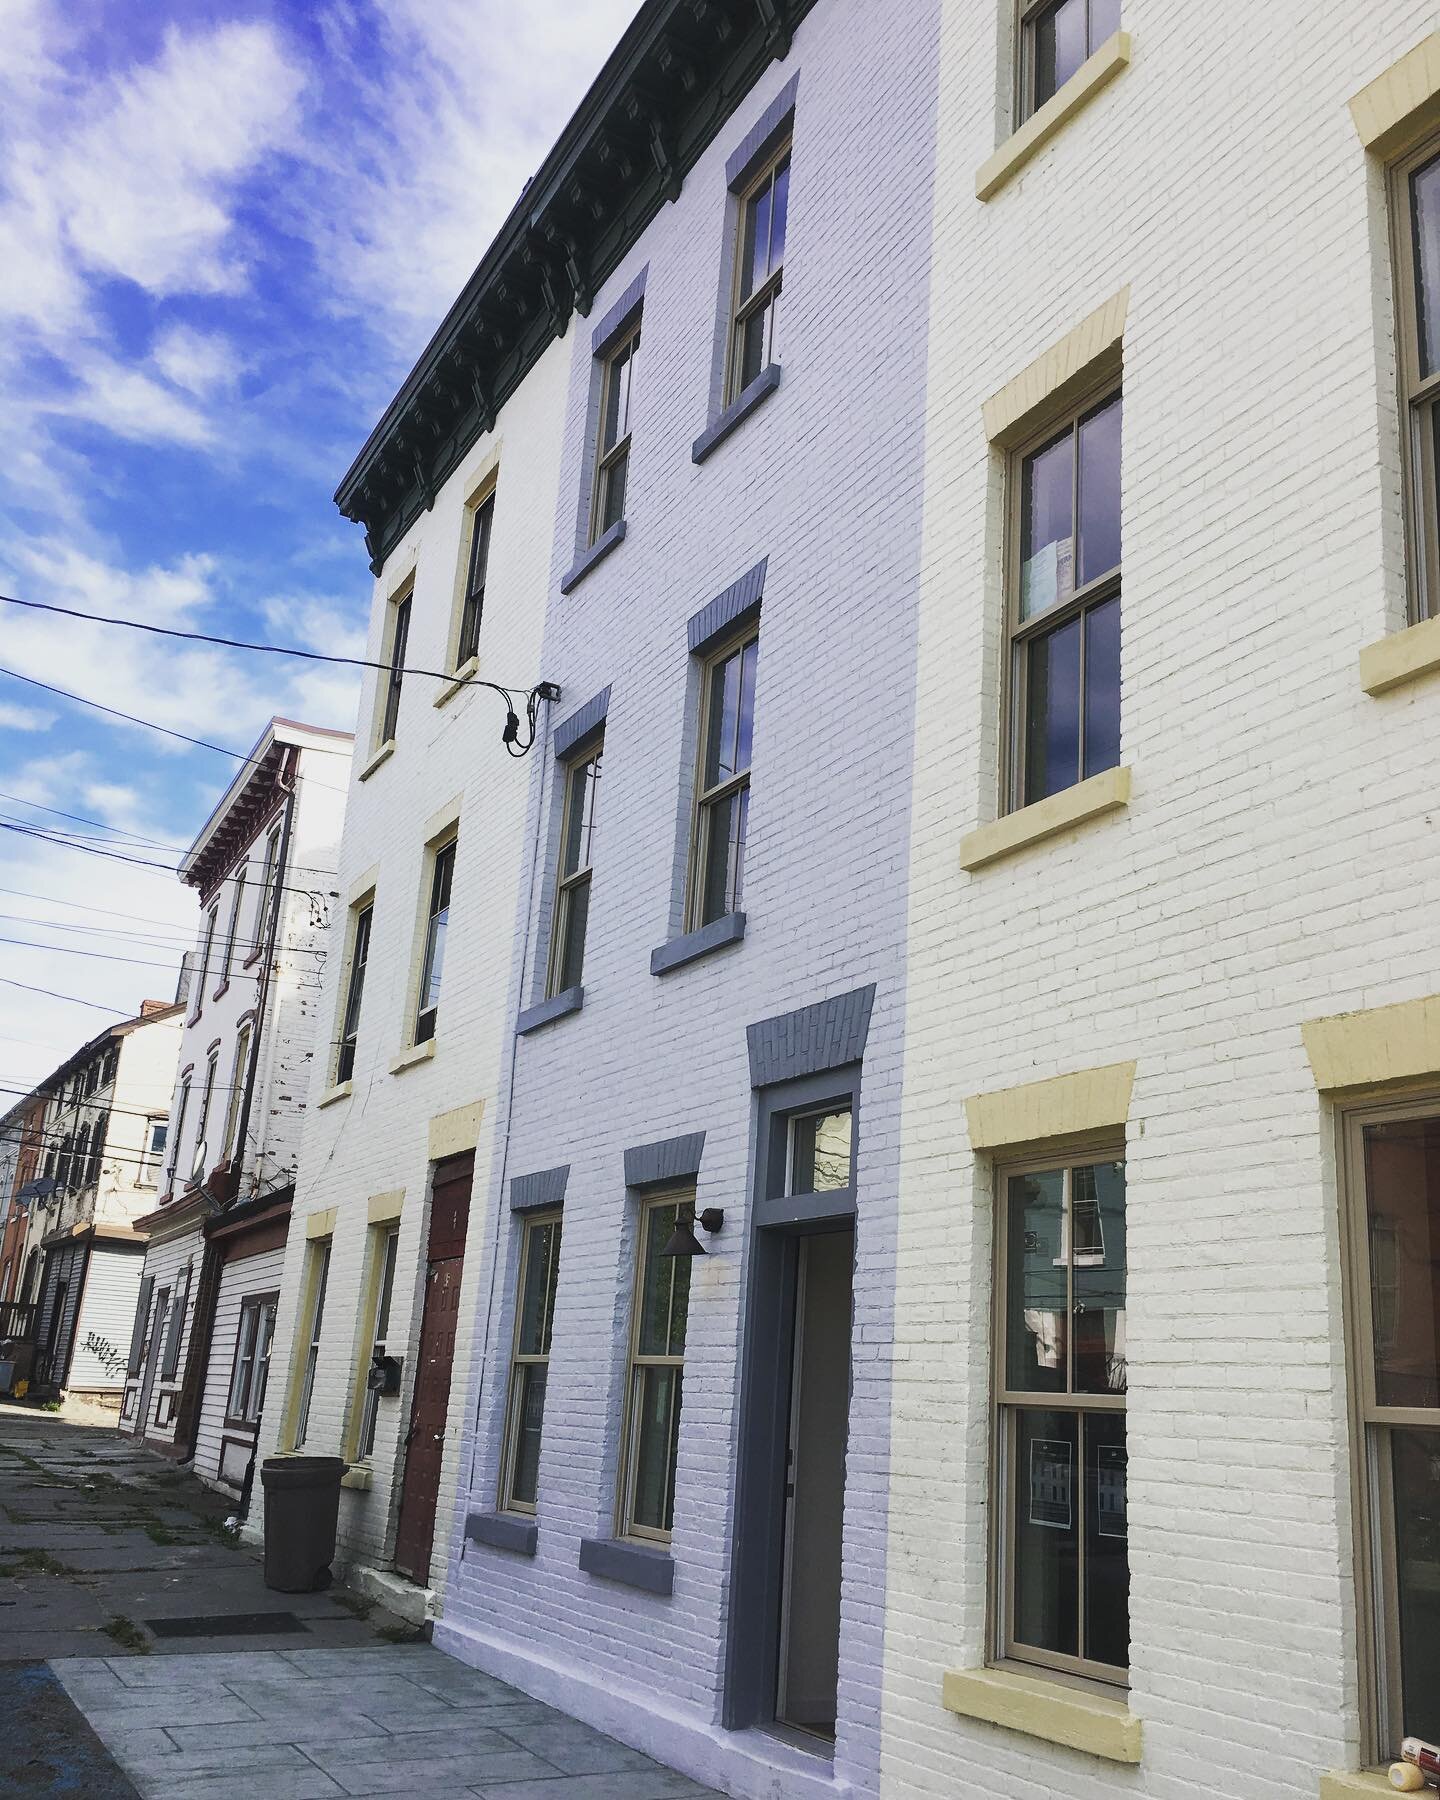 Want to own your own home? Currently live within 15 miles? Want an income-producing rental apartment to help support your mortgage payment? Visit us today at 45 and 45A Lander Street from 11-1 to learn more!